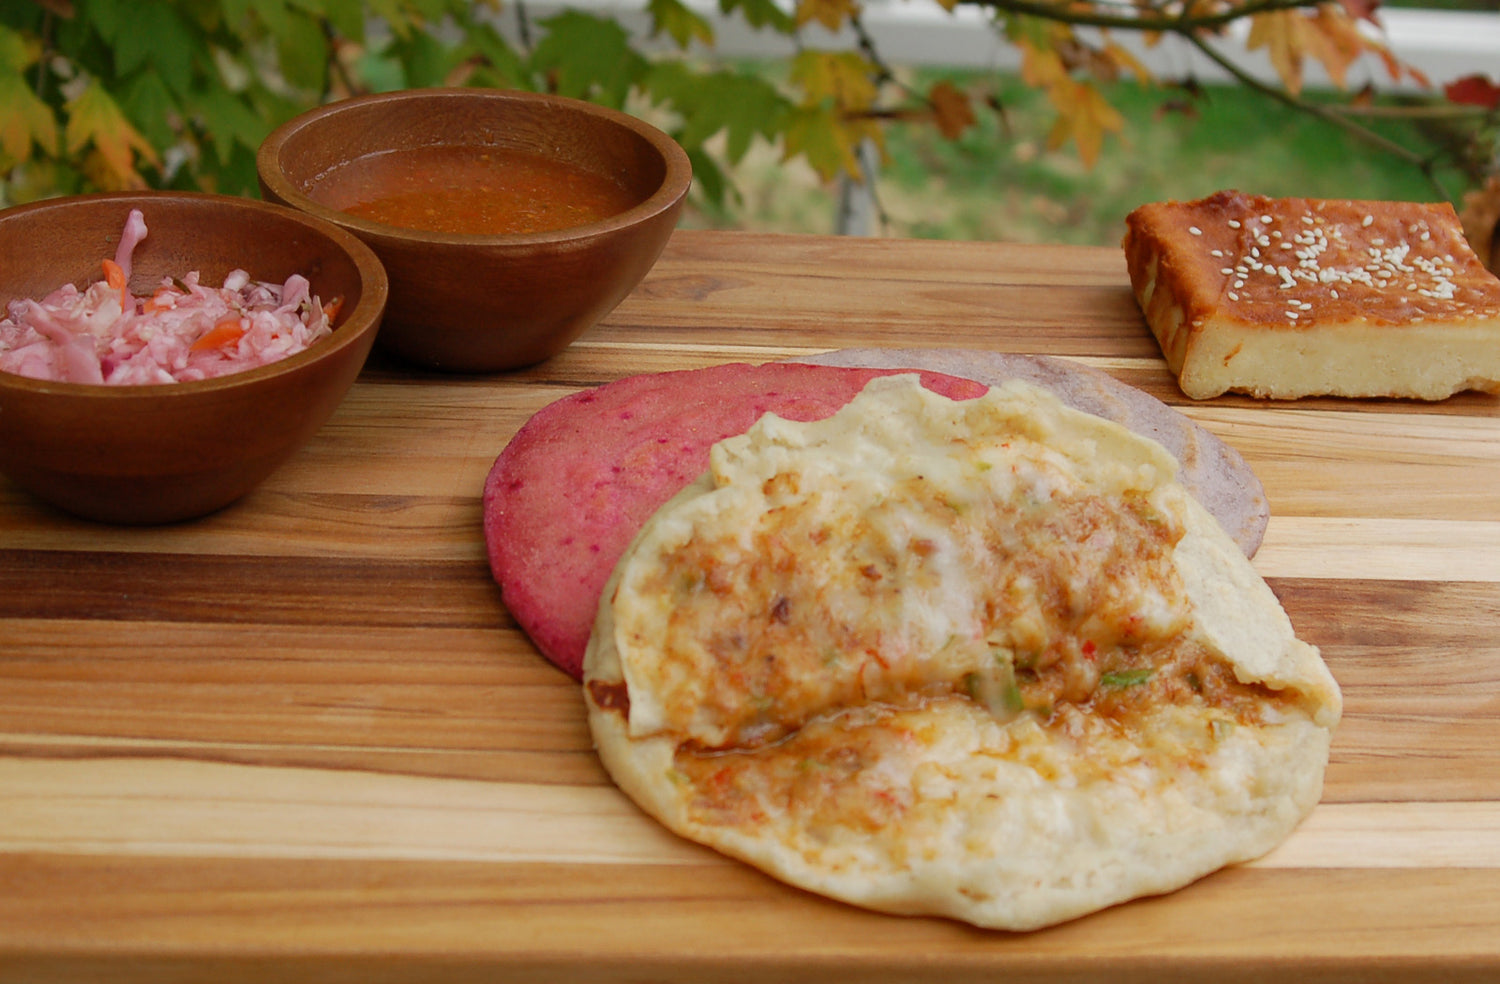 Xinca Foods dishes. Open beans and cheese pupusa, with a side of pickled cabbage and salsa. Also, a sweet quesadilla pastry.